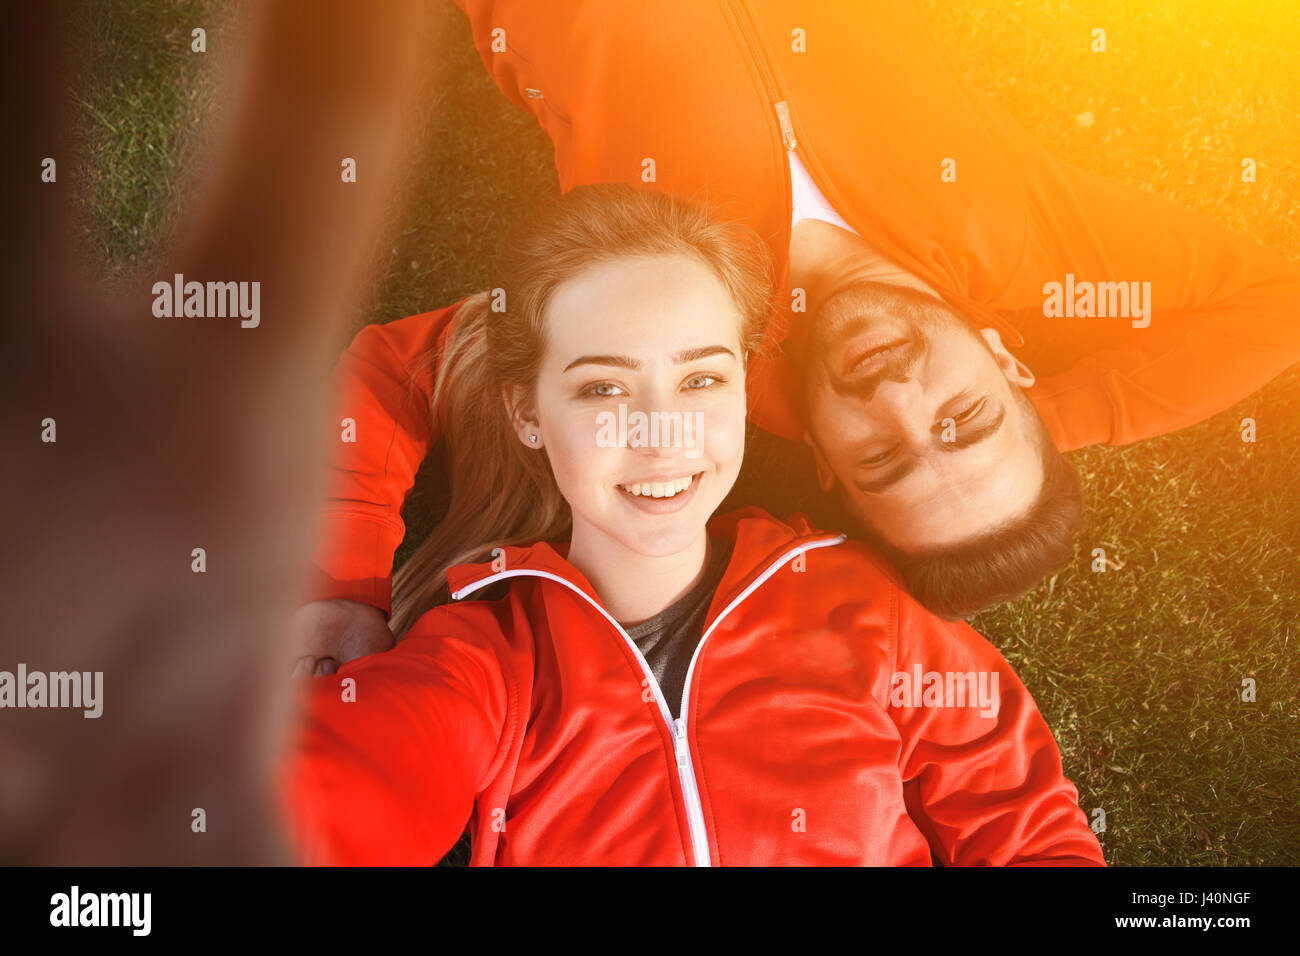 Sport man and woman making selfies in park Stock Photo